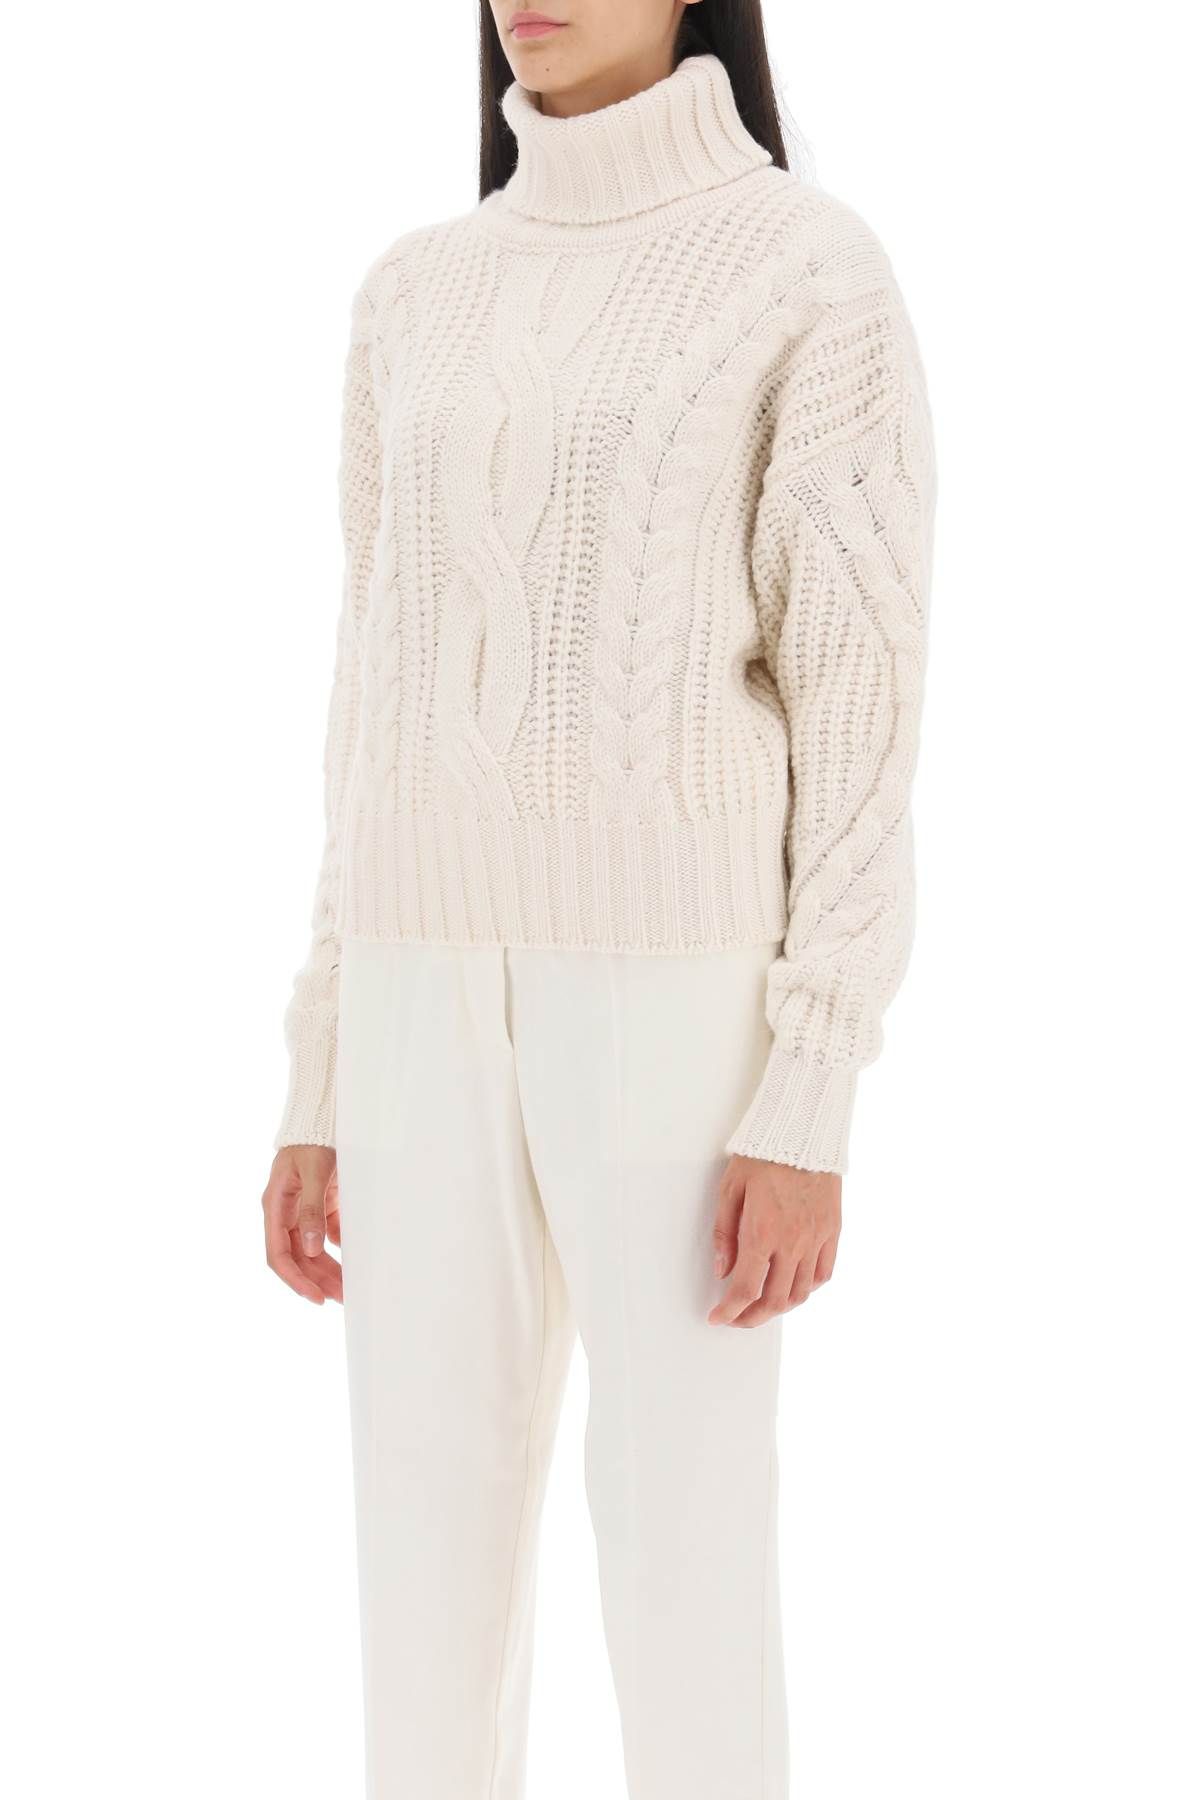 Shop Mvp Wardrobe Visconti Cable Knit Sweater In White